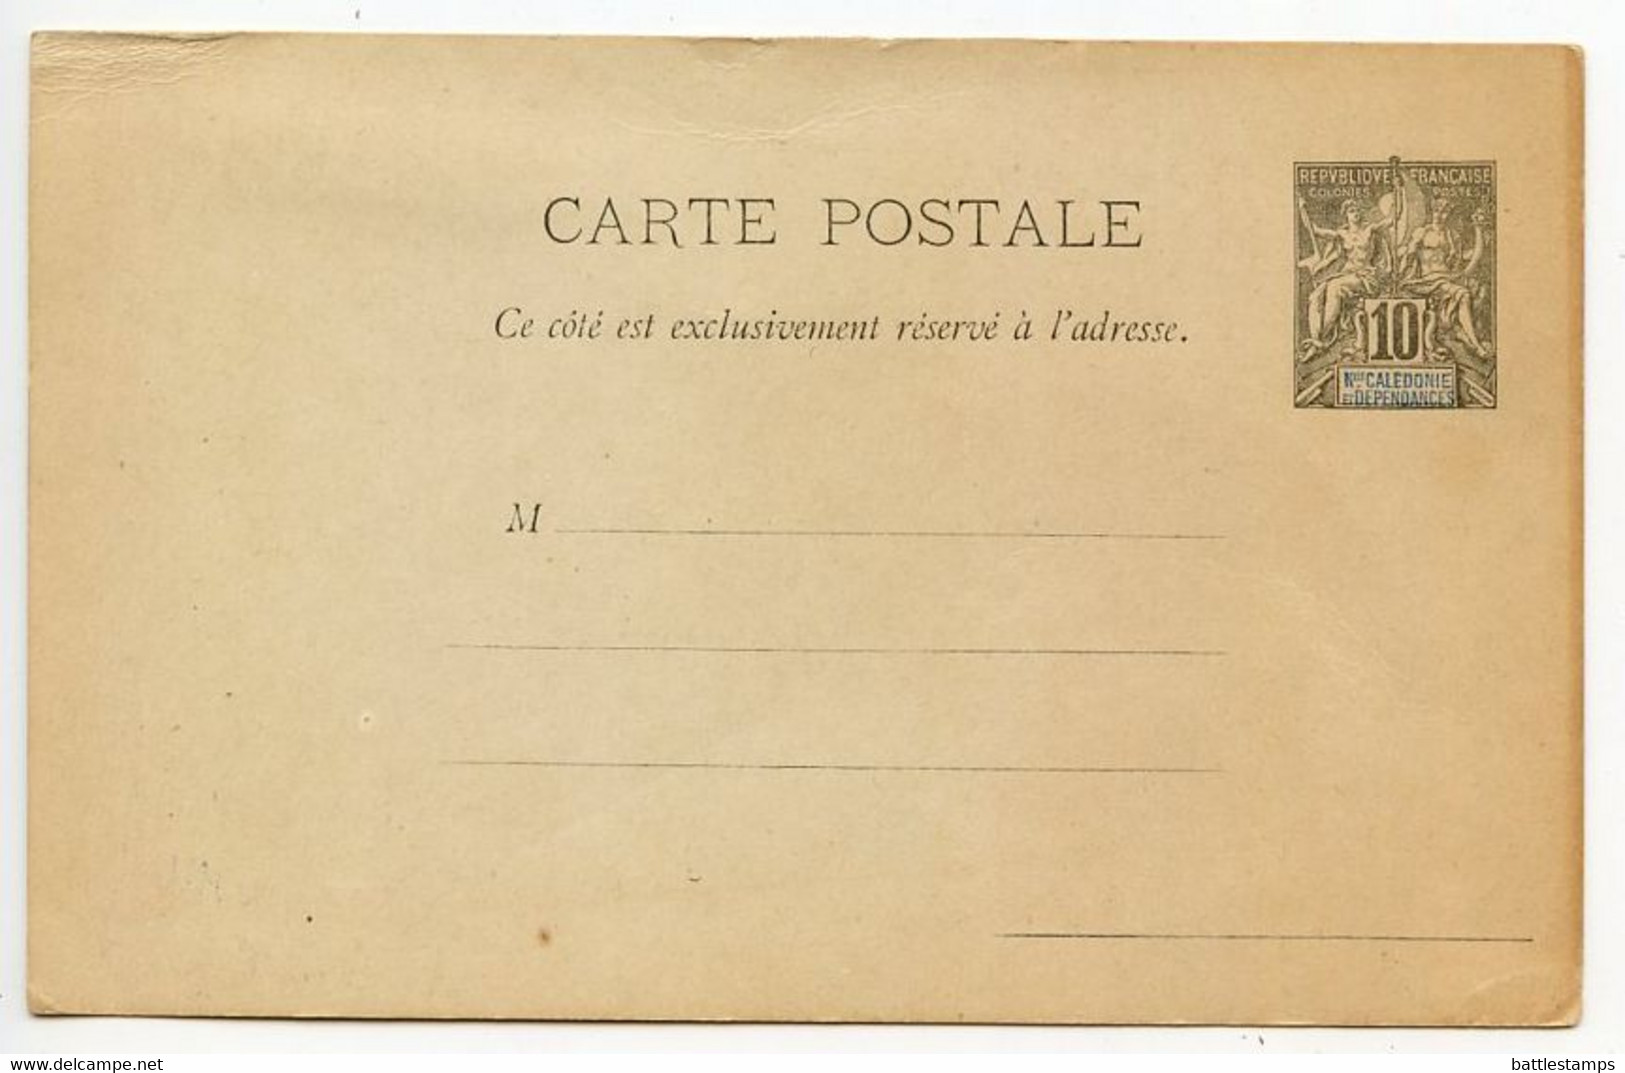 New Caledonia 1900's 10c. Navigation & Commerce Postal Card - Covers & Documents